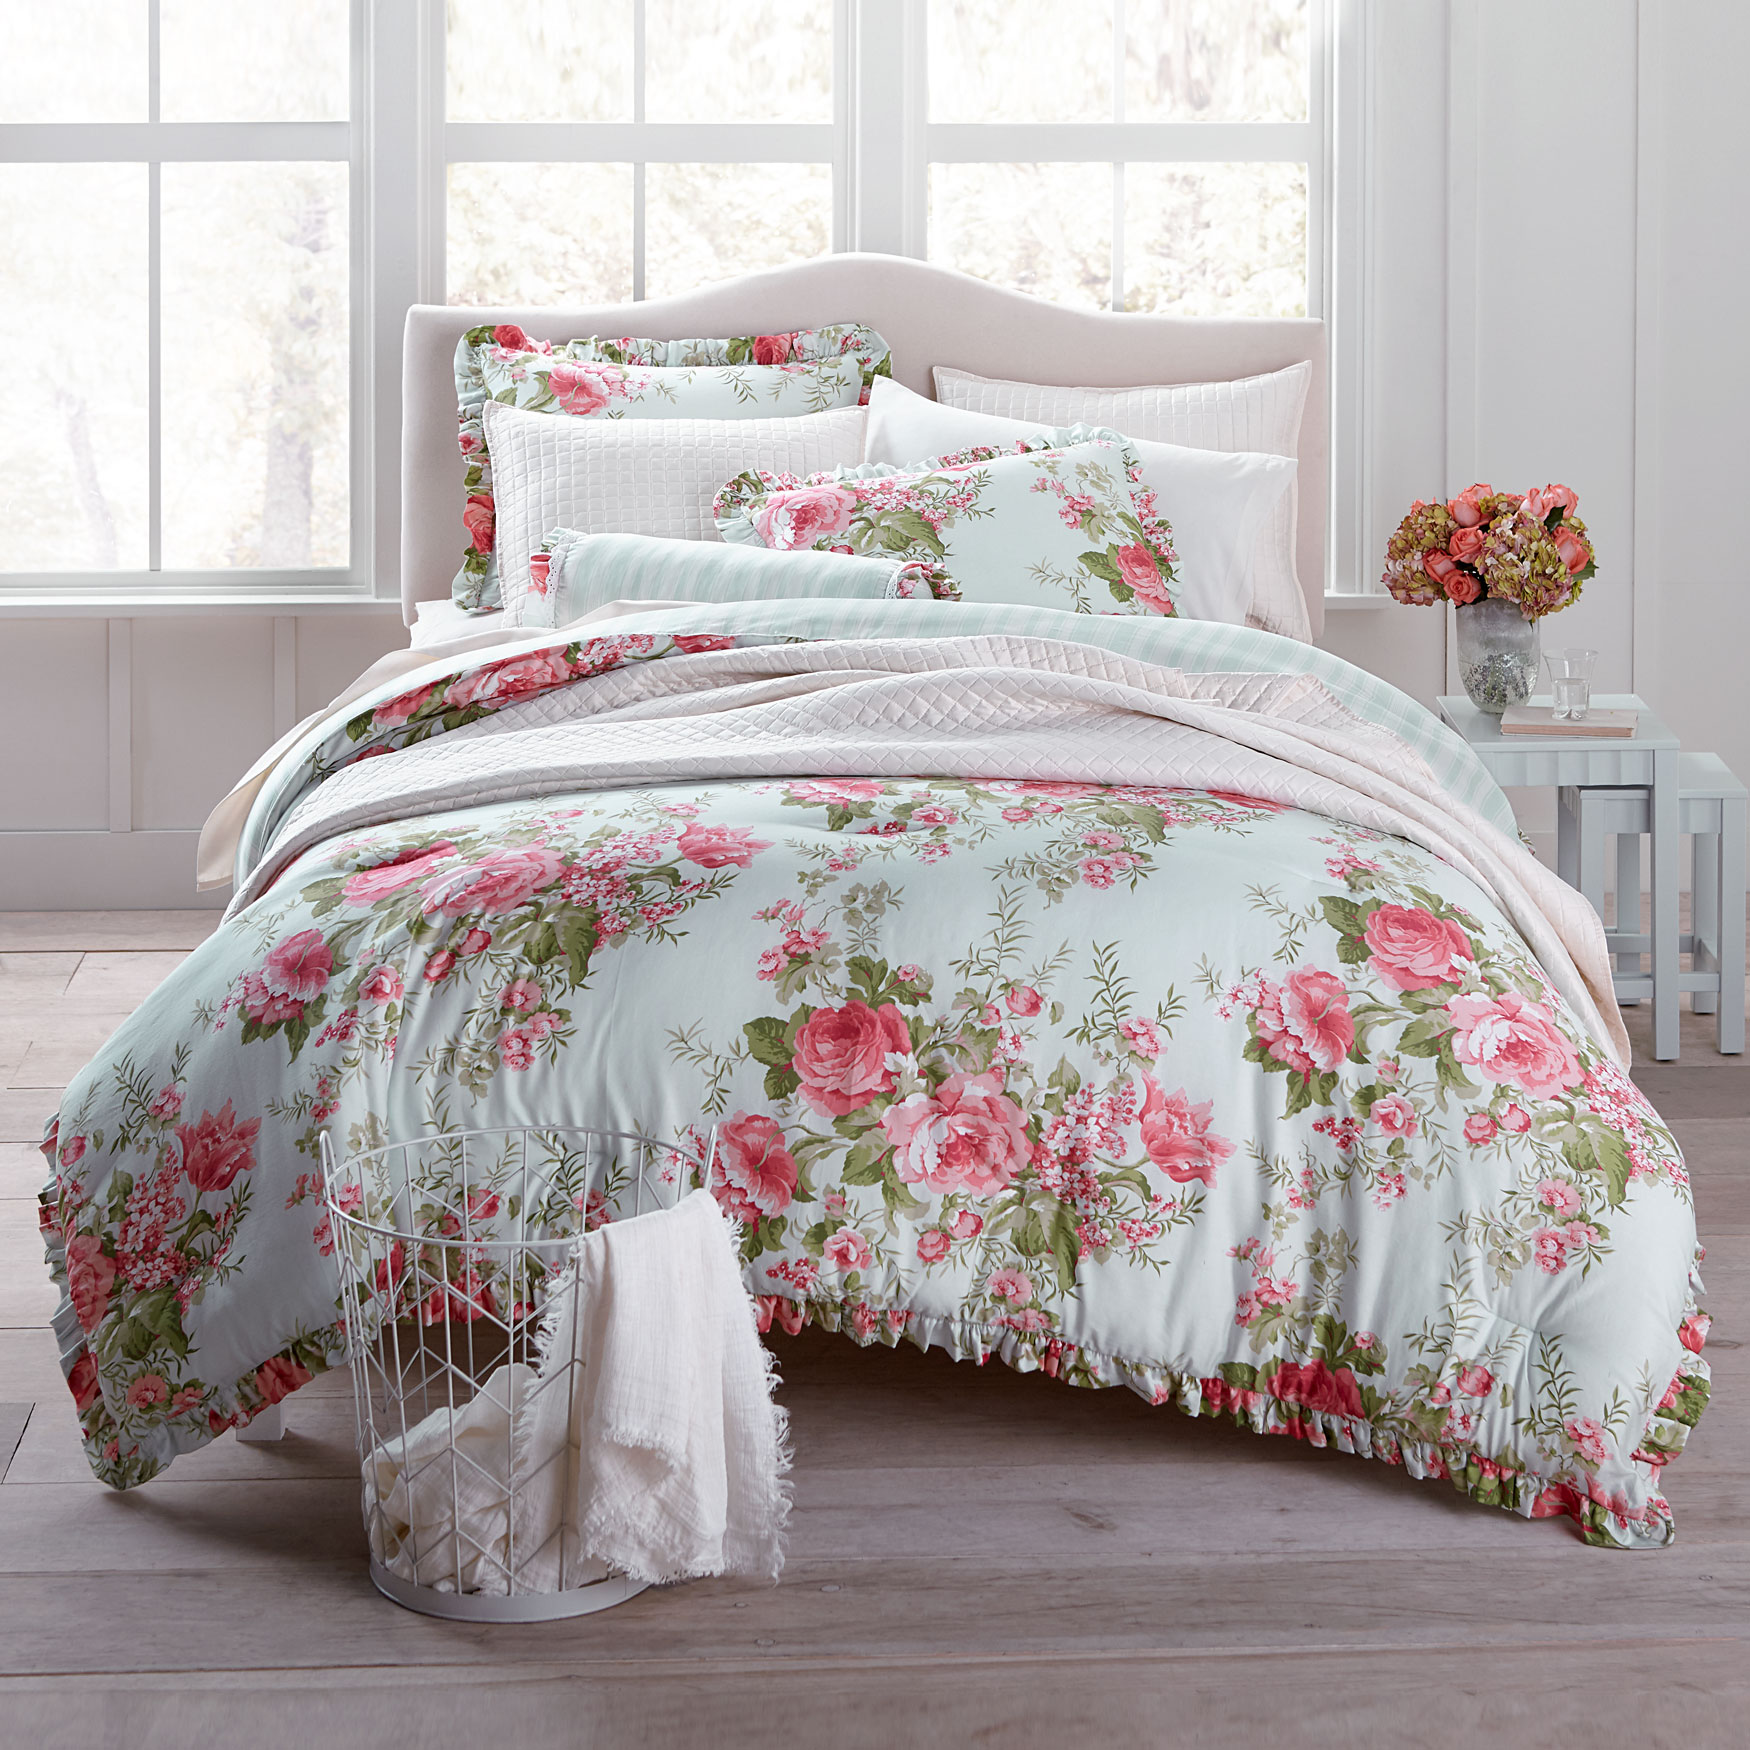 Brianna Cabbage Rose Comforter King Size